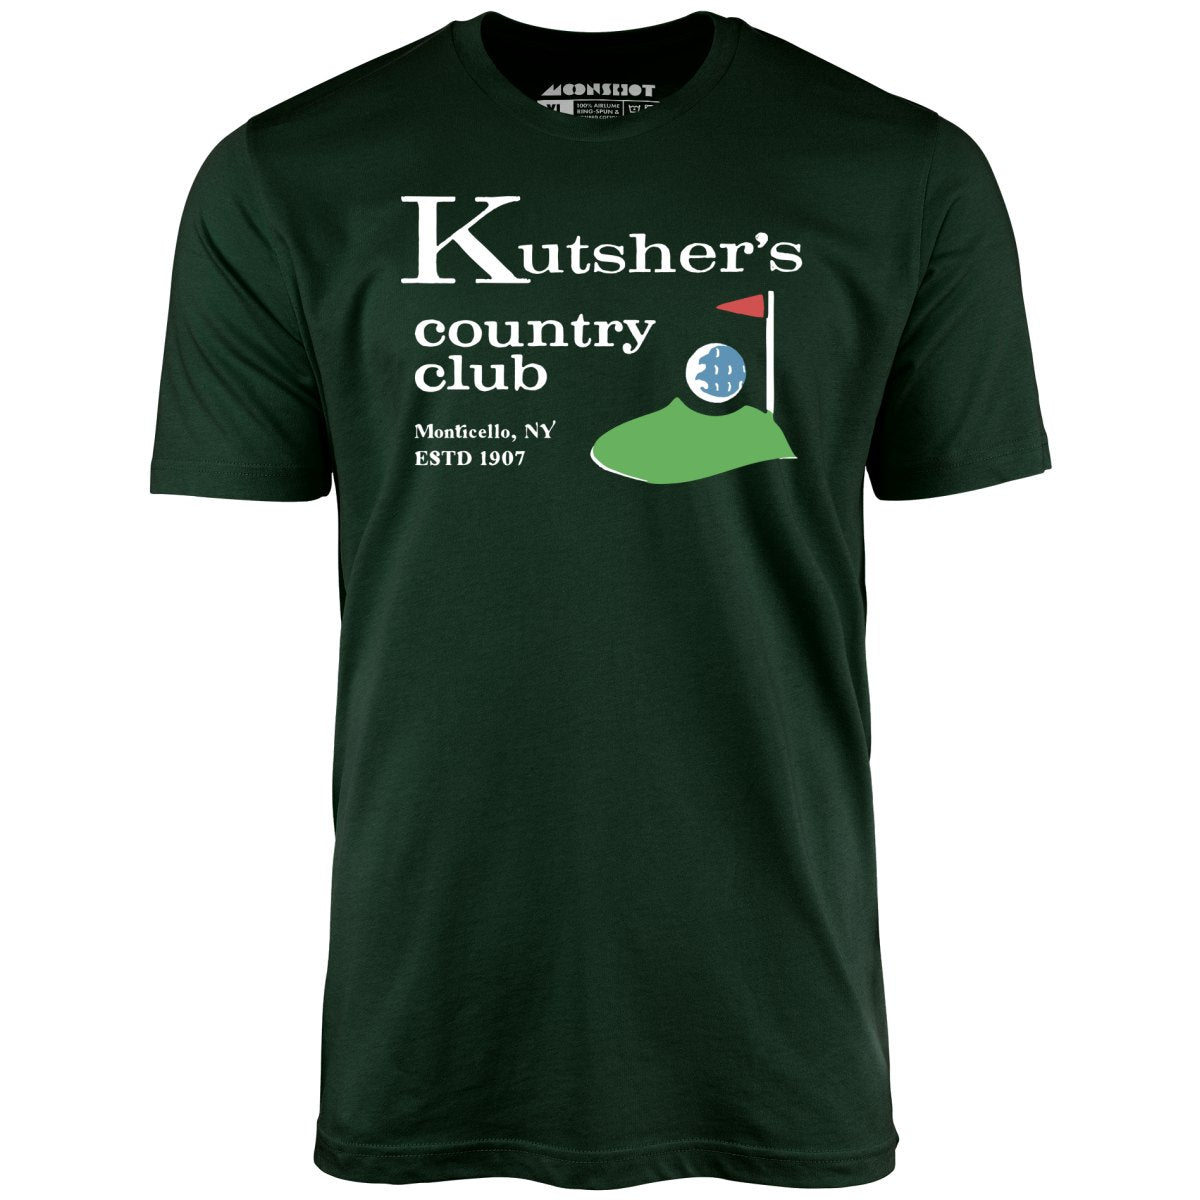 Kutsher's Country Club - Monticello, NY - Vintage Hotel - Unisex T-Shirt